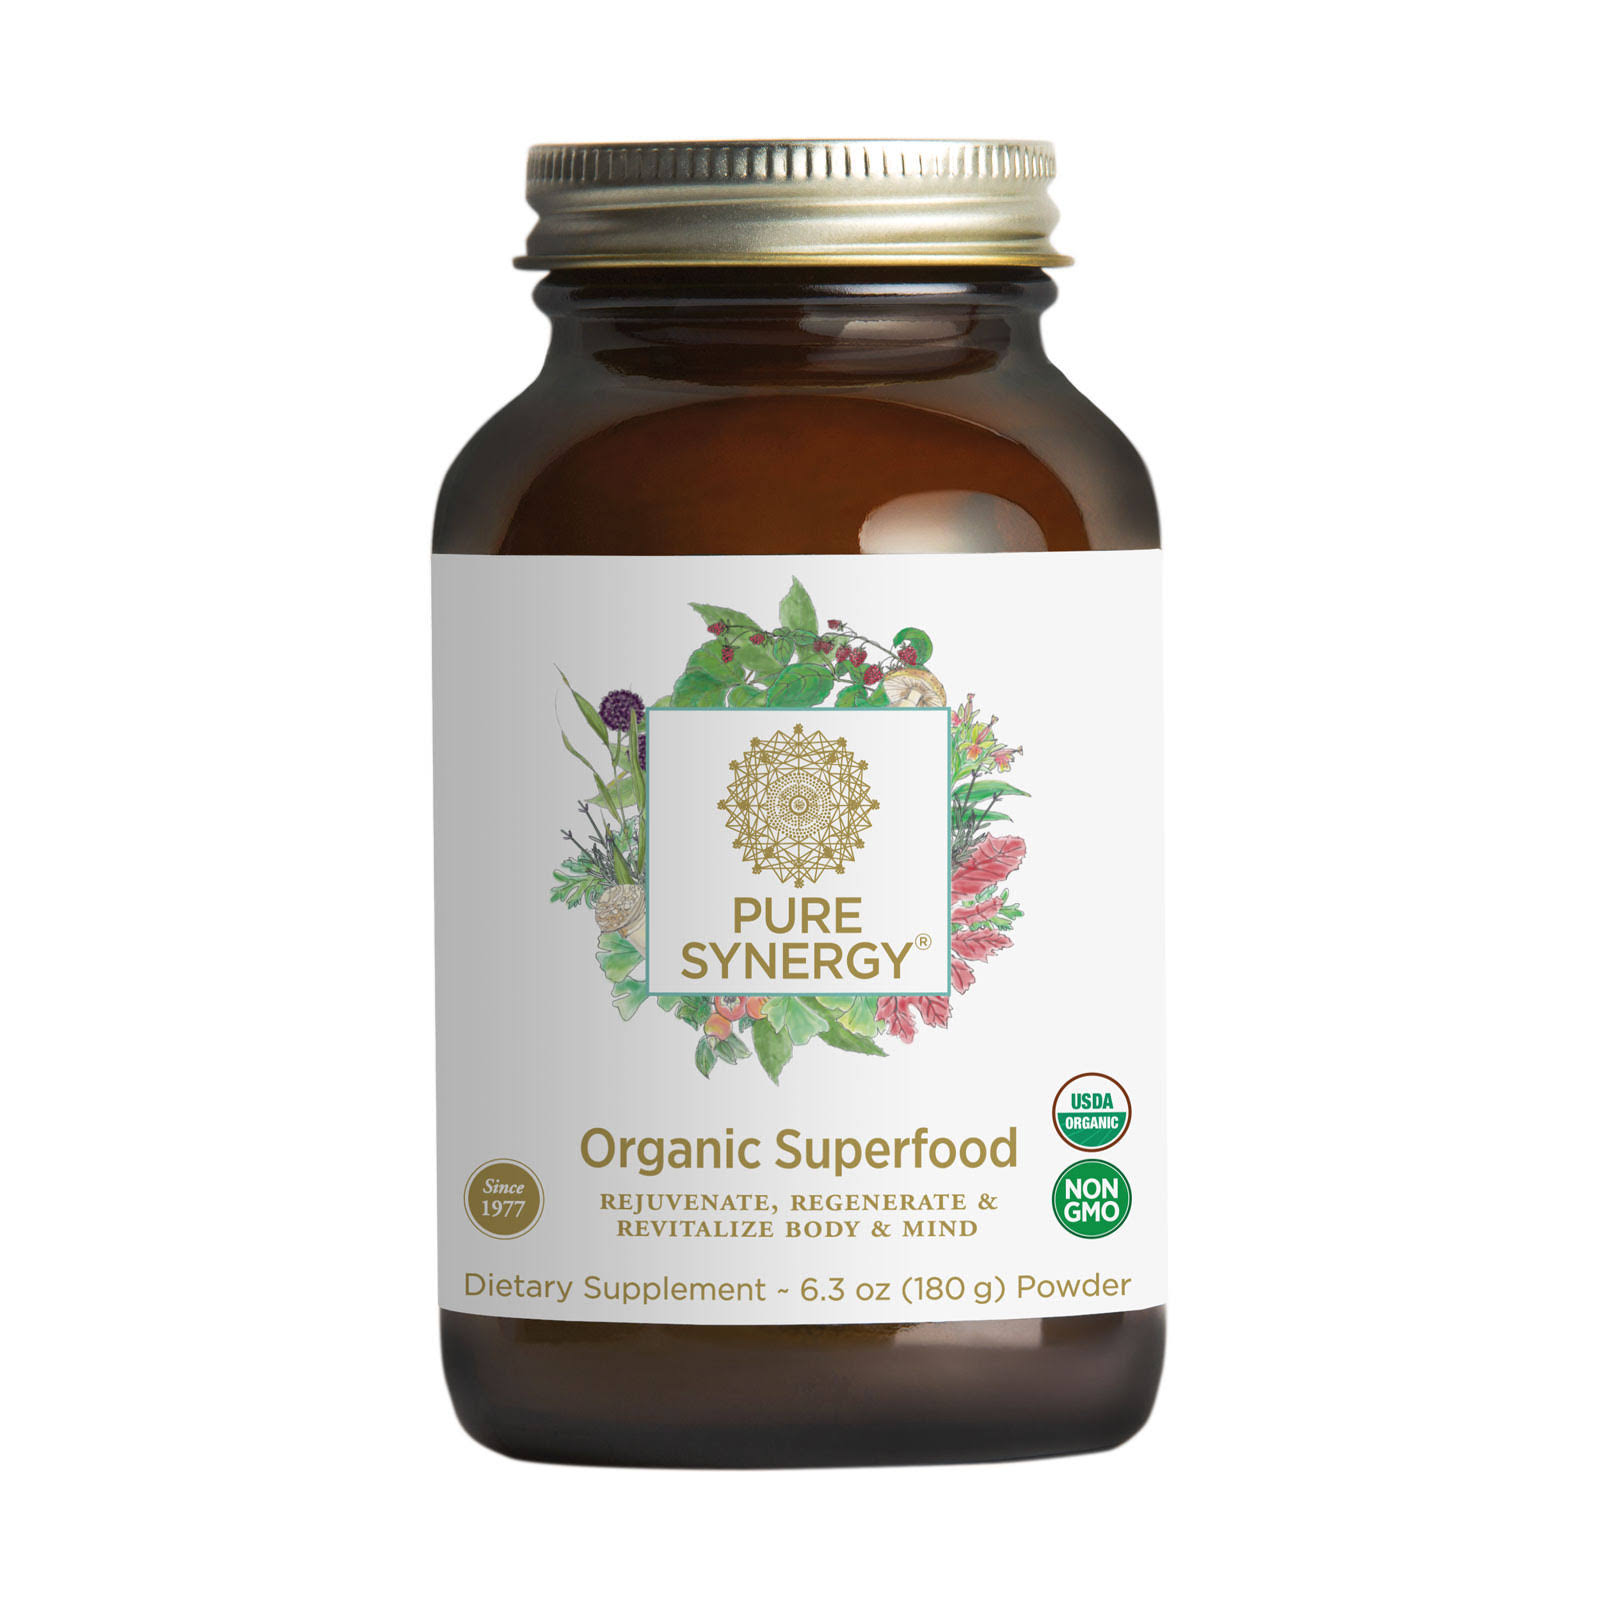 Pure Synergy Organic Superfood - 180g